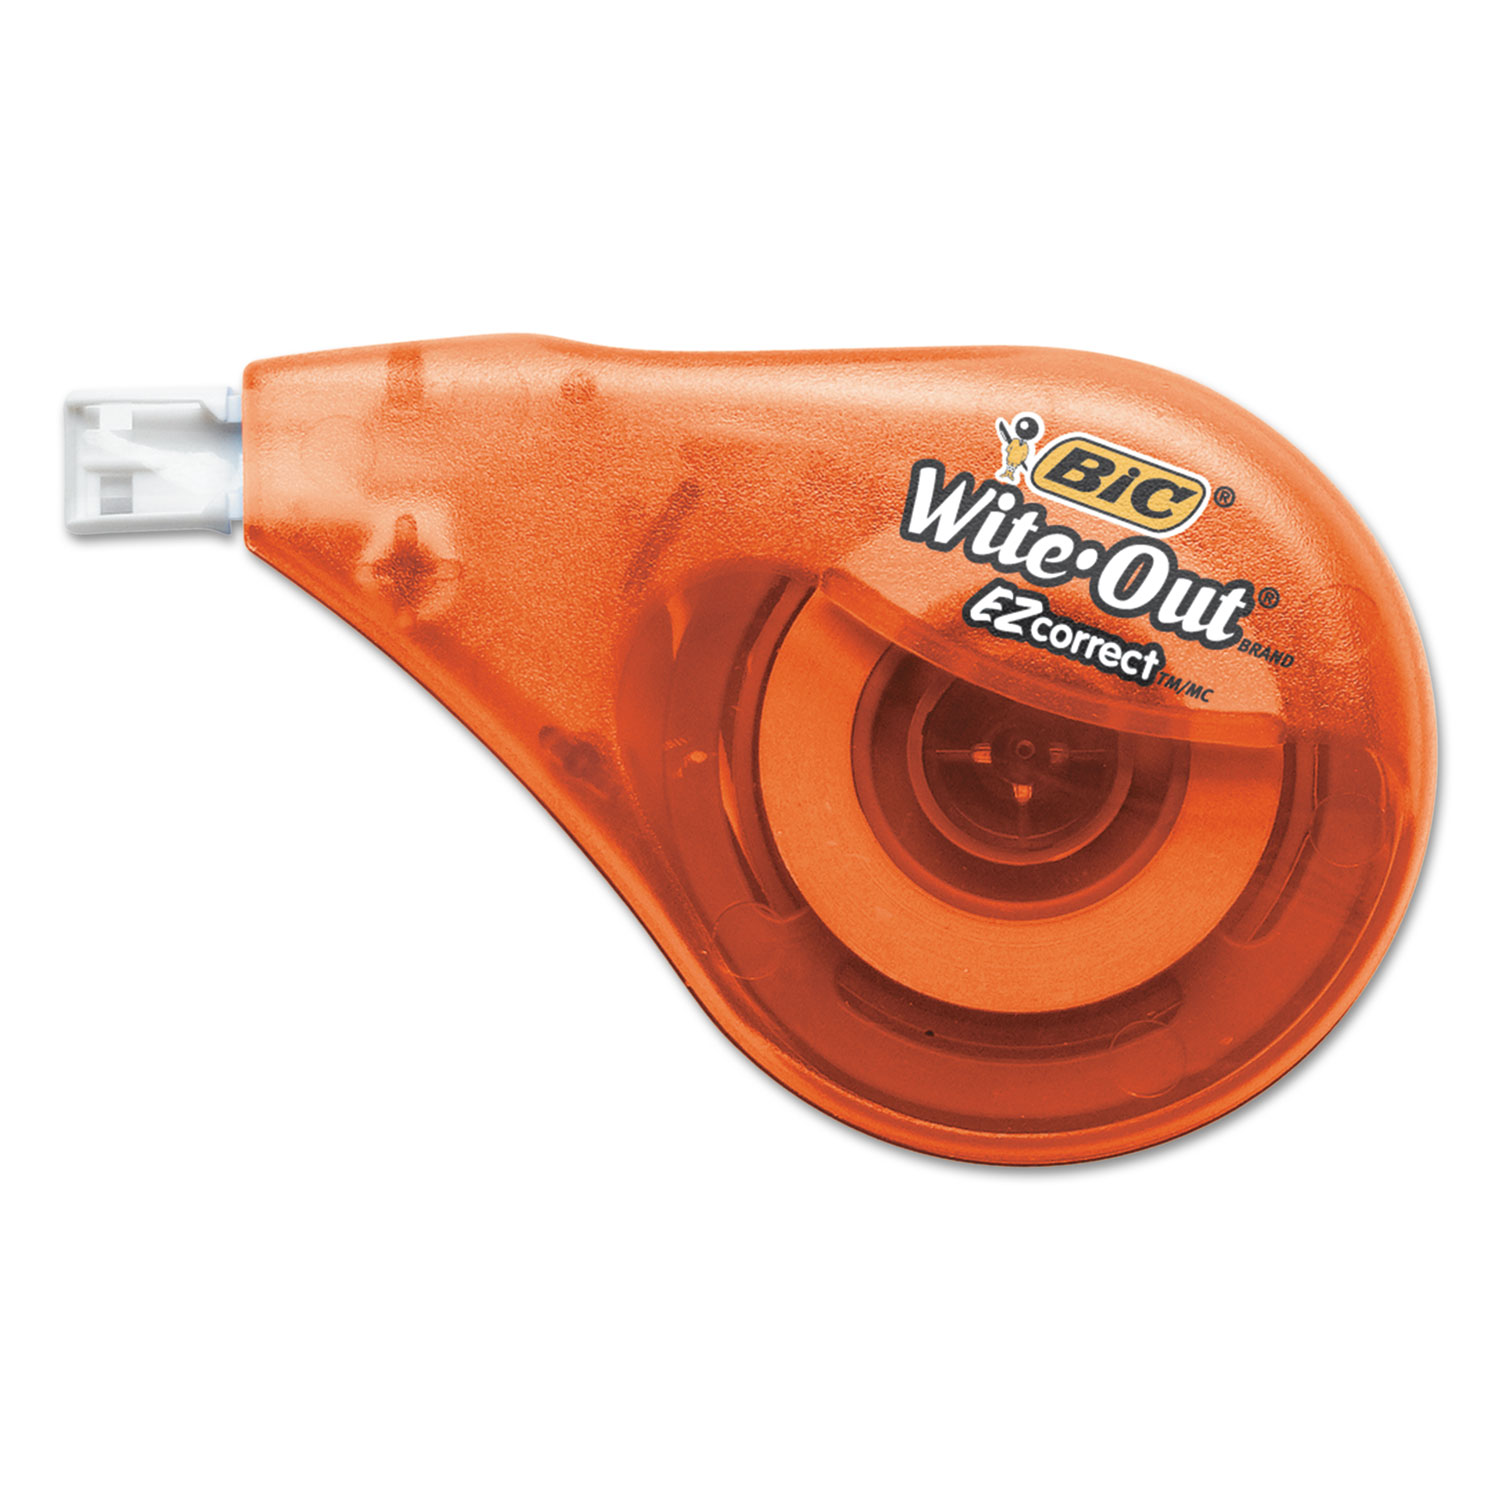 Wite-Out EZ Correct Correction Tape, Non-Refillable, 1/6 x 472, 2/Pack